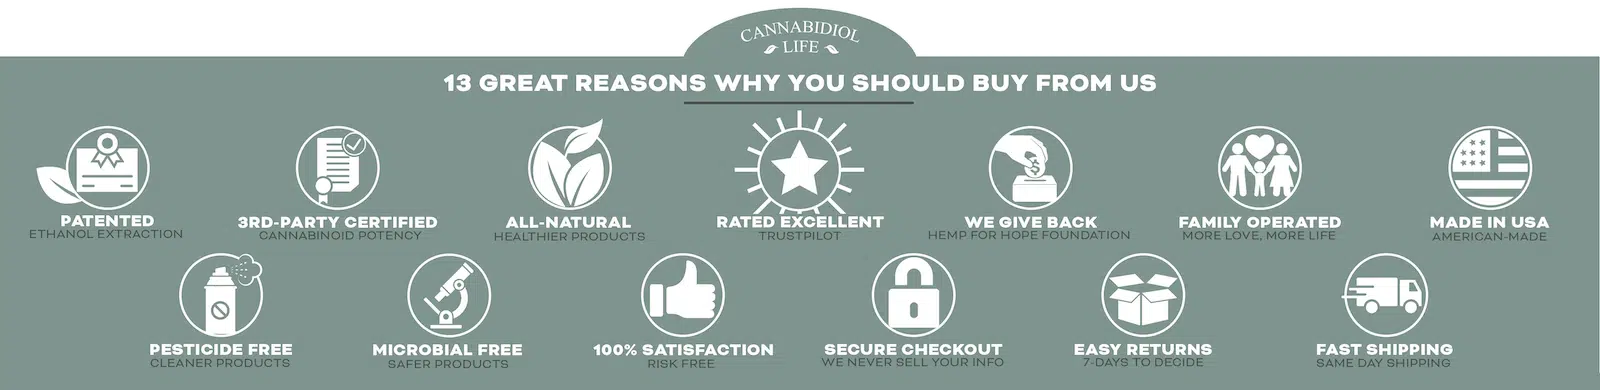 13 Great Reasons Why You Should Buy From Us